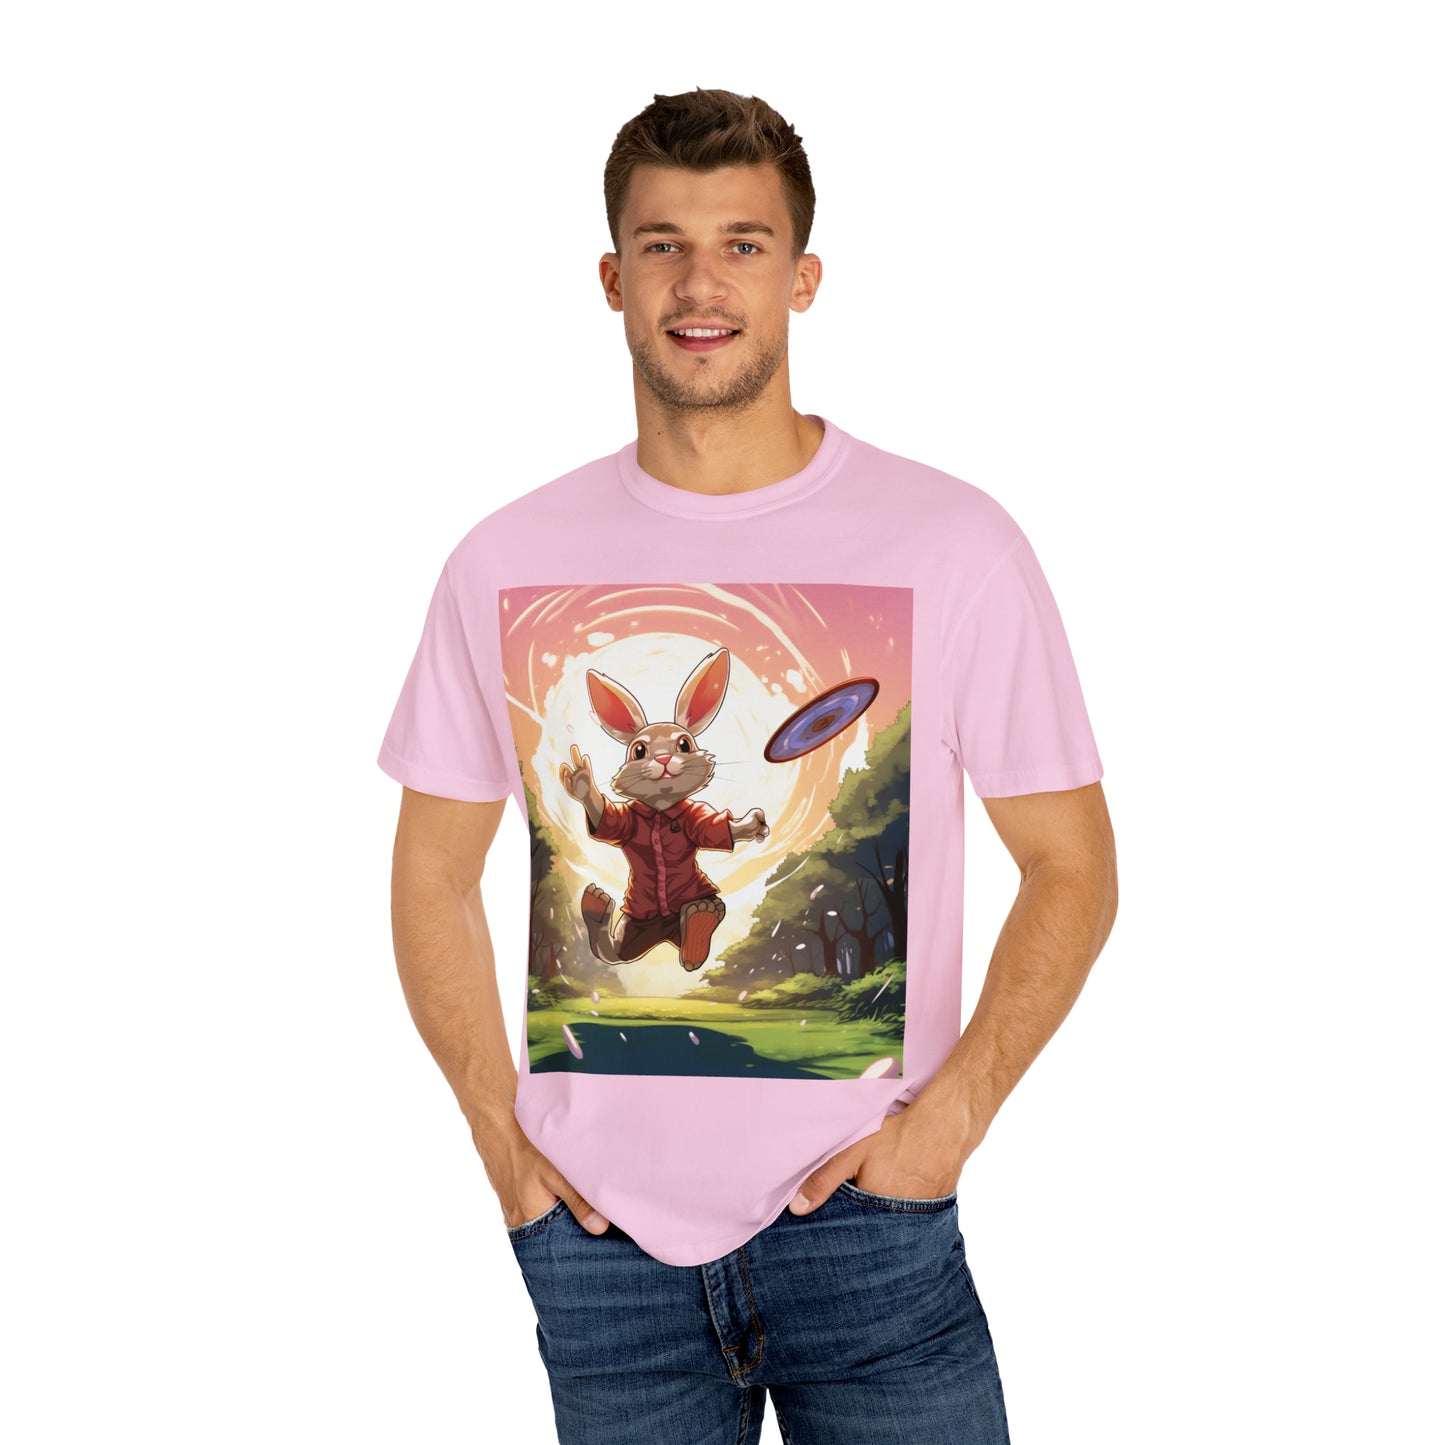 Disc Golf Rabbit: Bunny Aiming Frisbee for Basket Chain - Unisex Garment-Dyed T-shirt